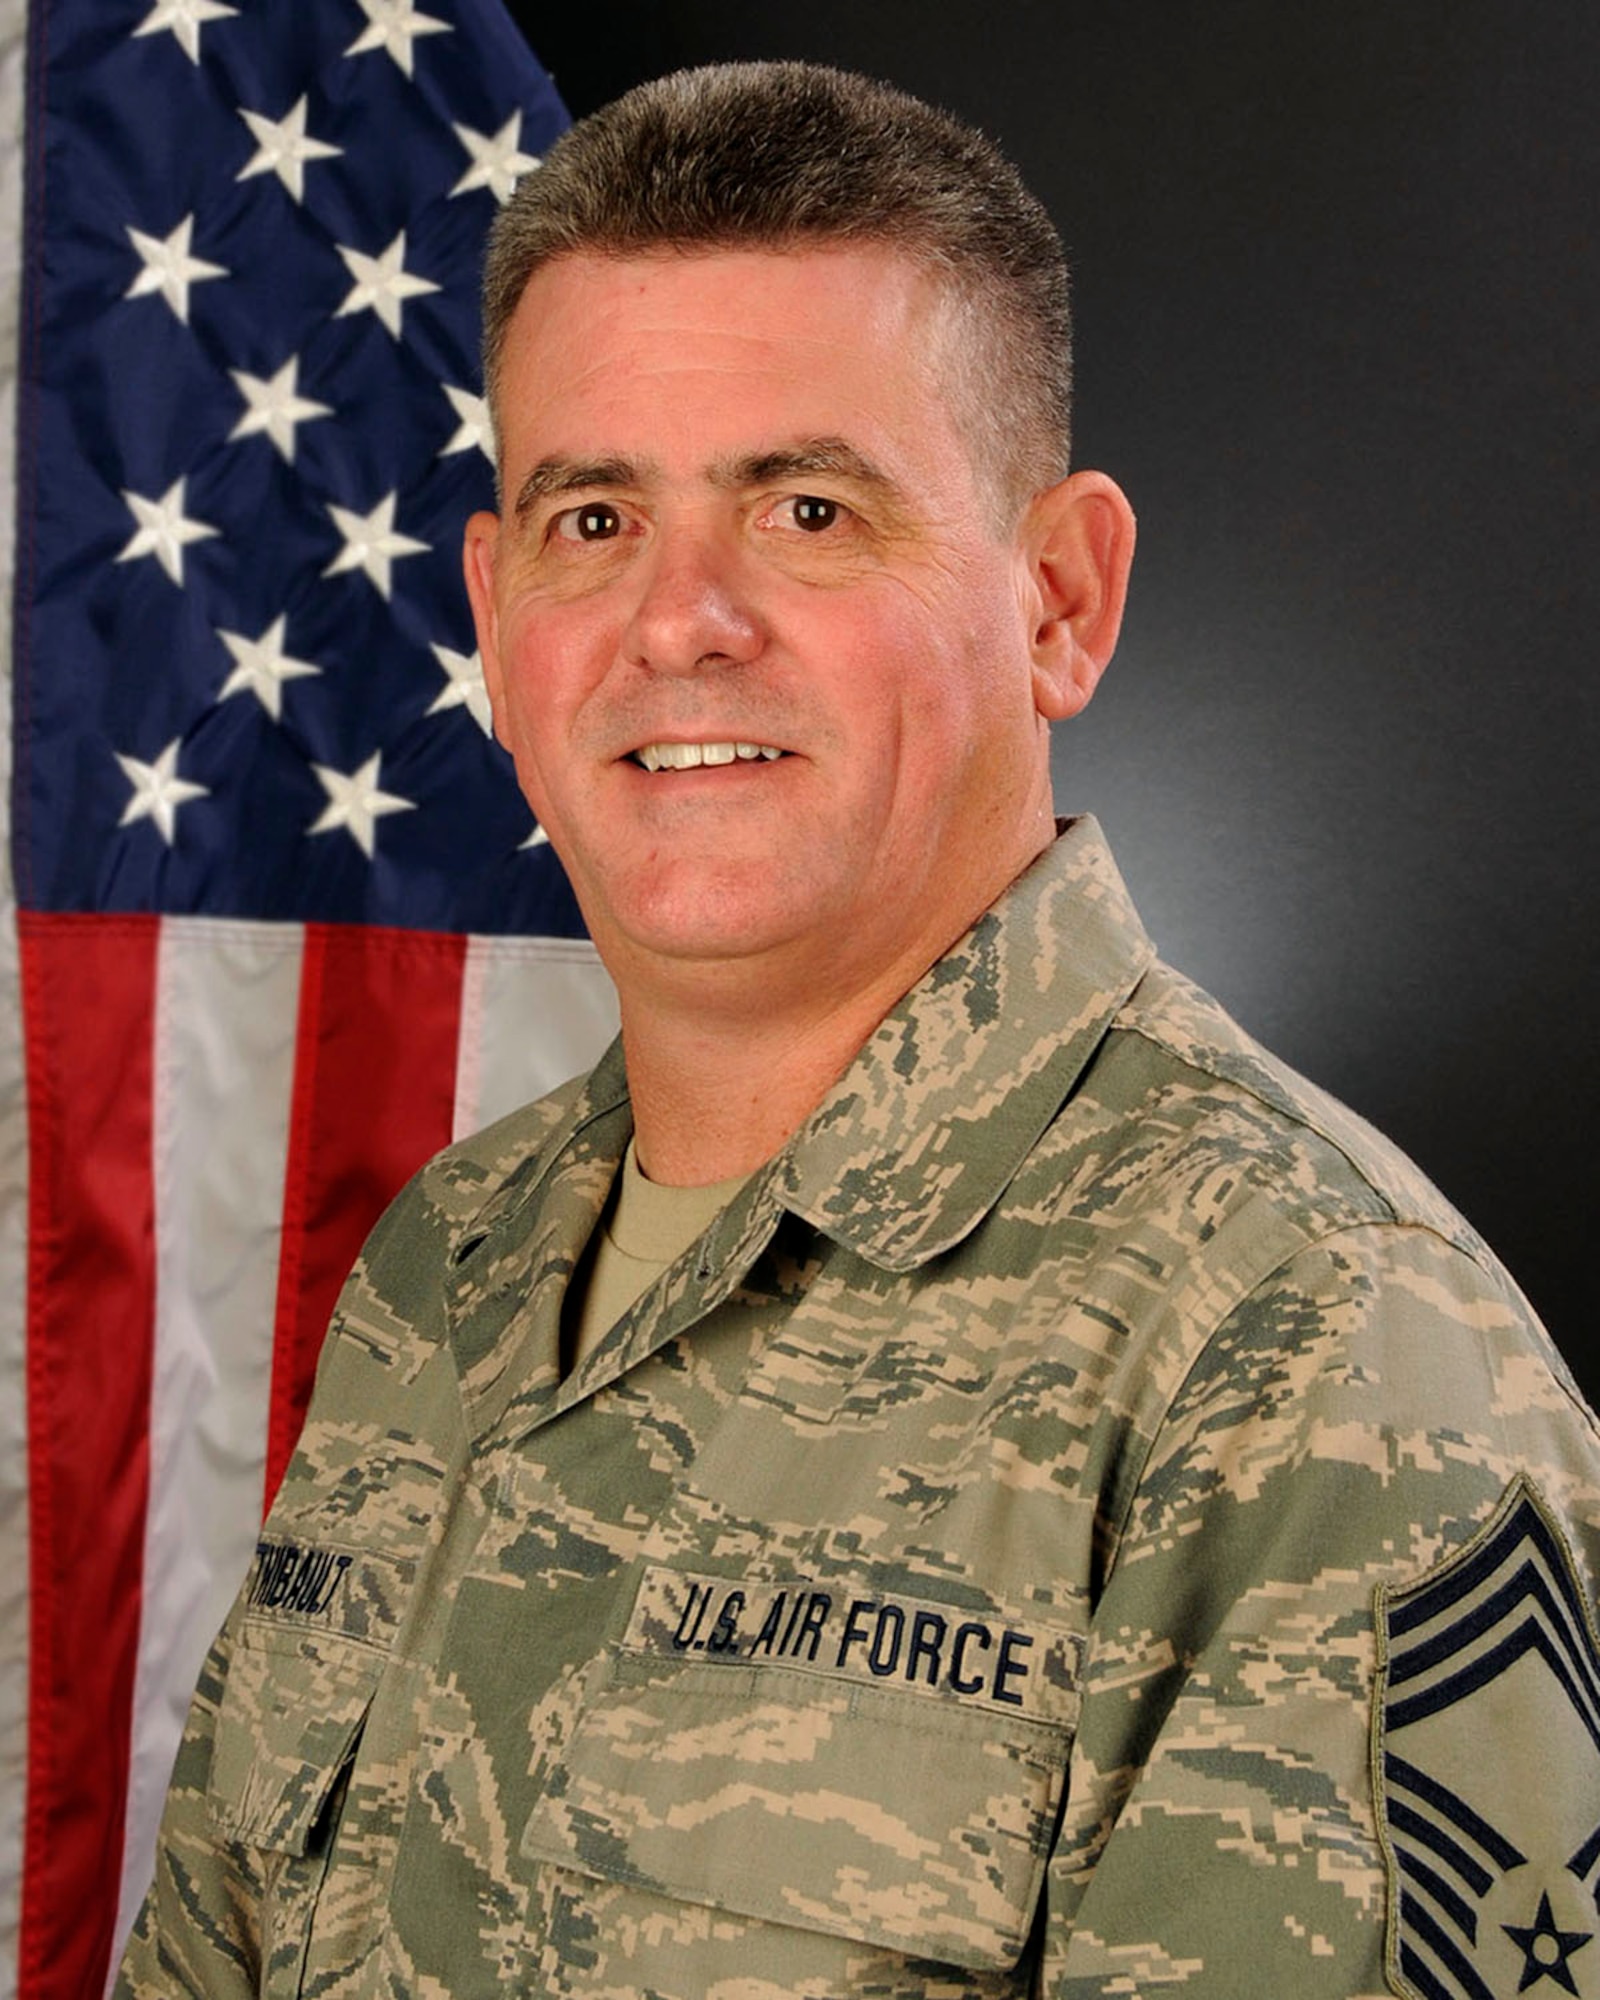 Portrait of U.S. Air Force Chief Master Sgt. Robert Thibault from the 169th Maintenance Group at McEntire Joint National Guard Base, South Carolina Air National Guard, July 12, 2014. (U.S. Air National Guard photo by Senior Master Sgt. Edward Snyder)